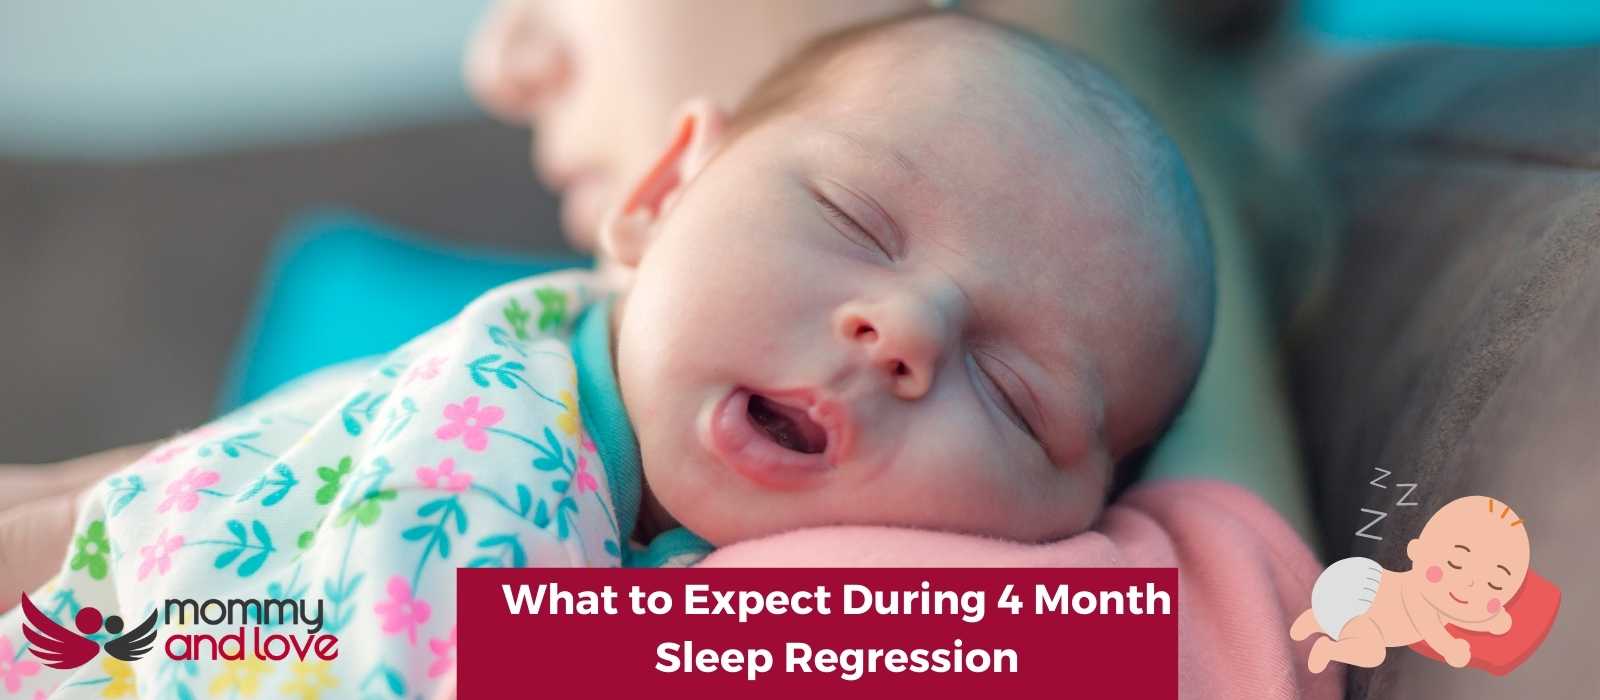 What to Expect During 4 Month Sleep Regression